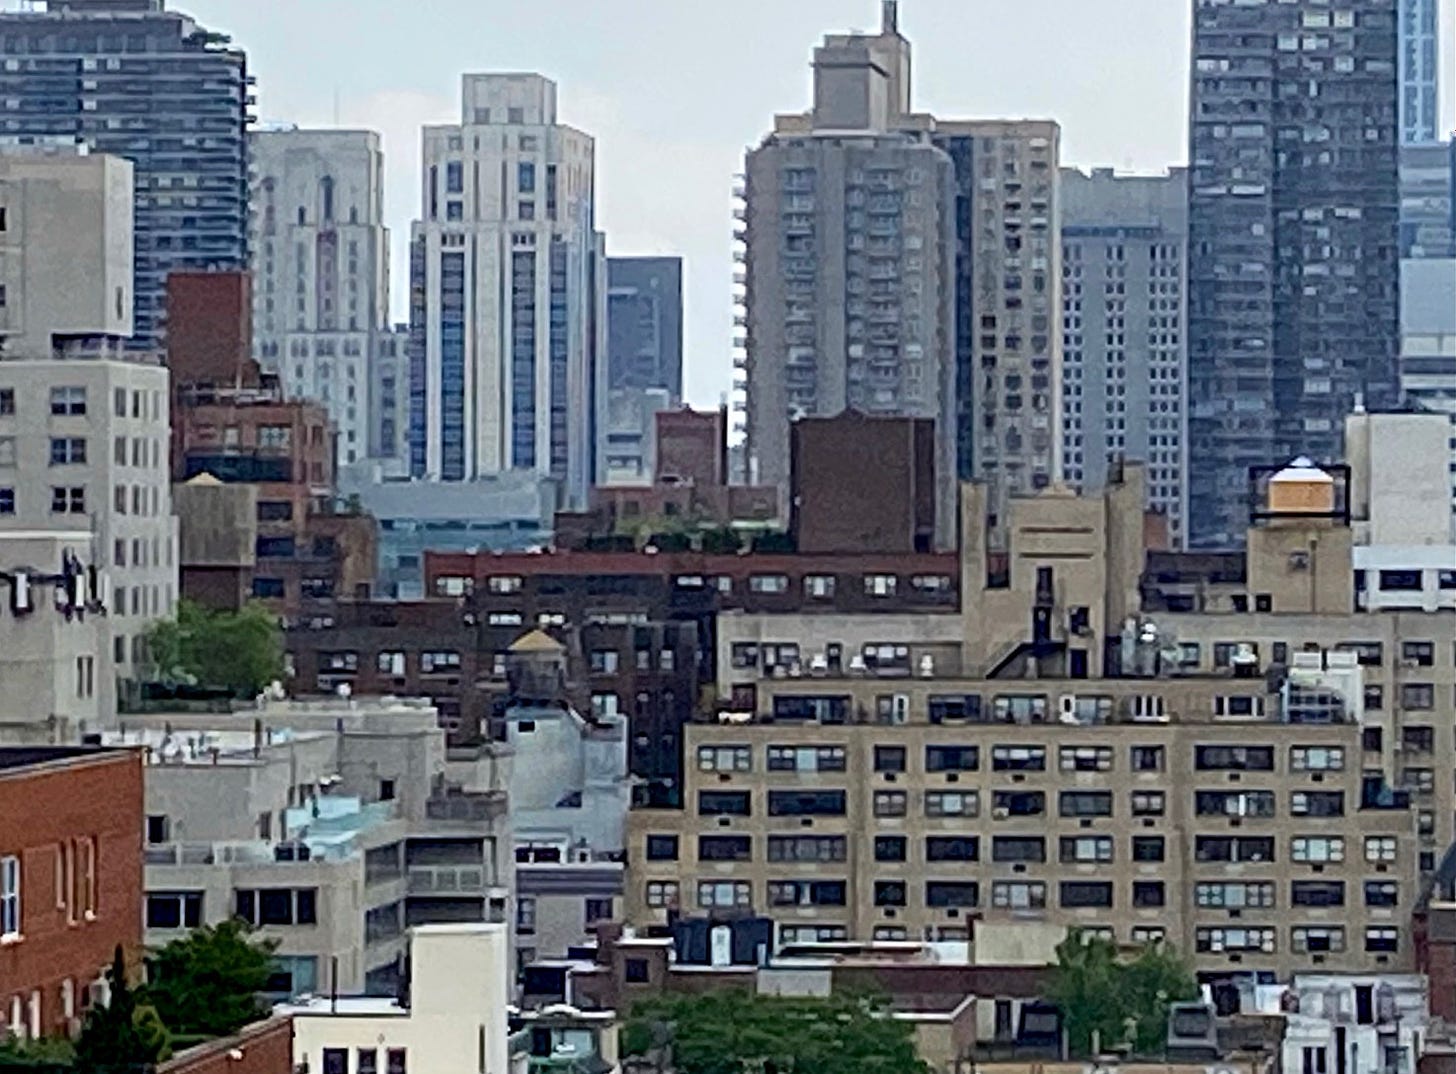 A city skyline with residential buildings of varying heights. 7 water towers can be seen on the roofs, some concealed behind masonry.